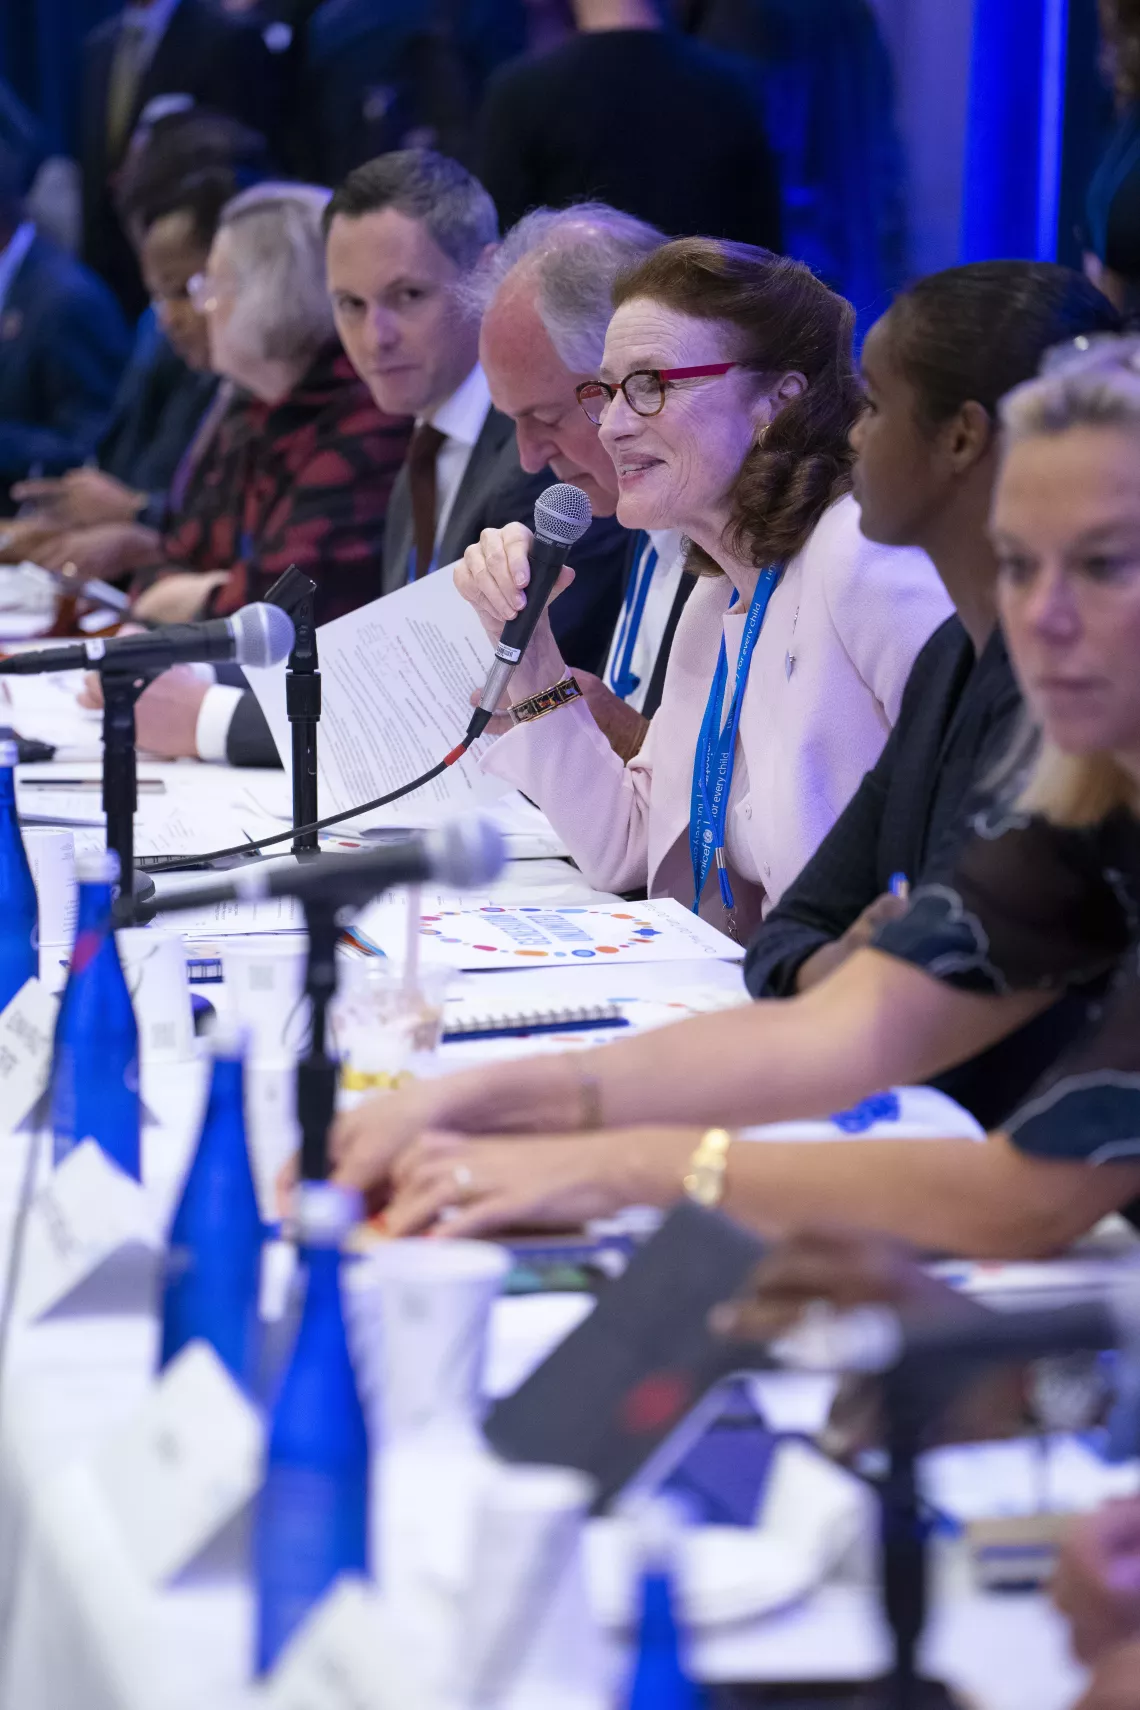 UNICEF Executive Director Henriette H. Fore speaks during the Third Global Board Meeting of Generation Unlimited on 23 September 2019 at UNICEF House in New York.